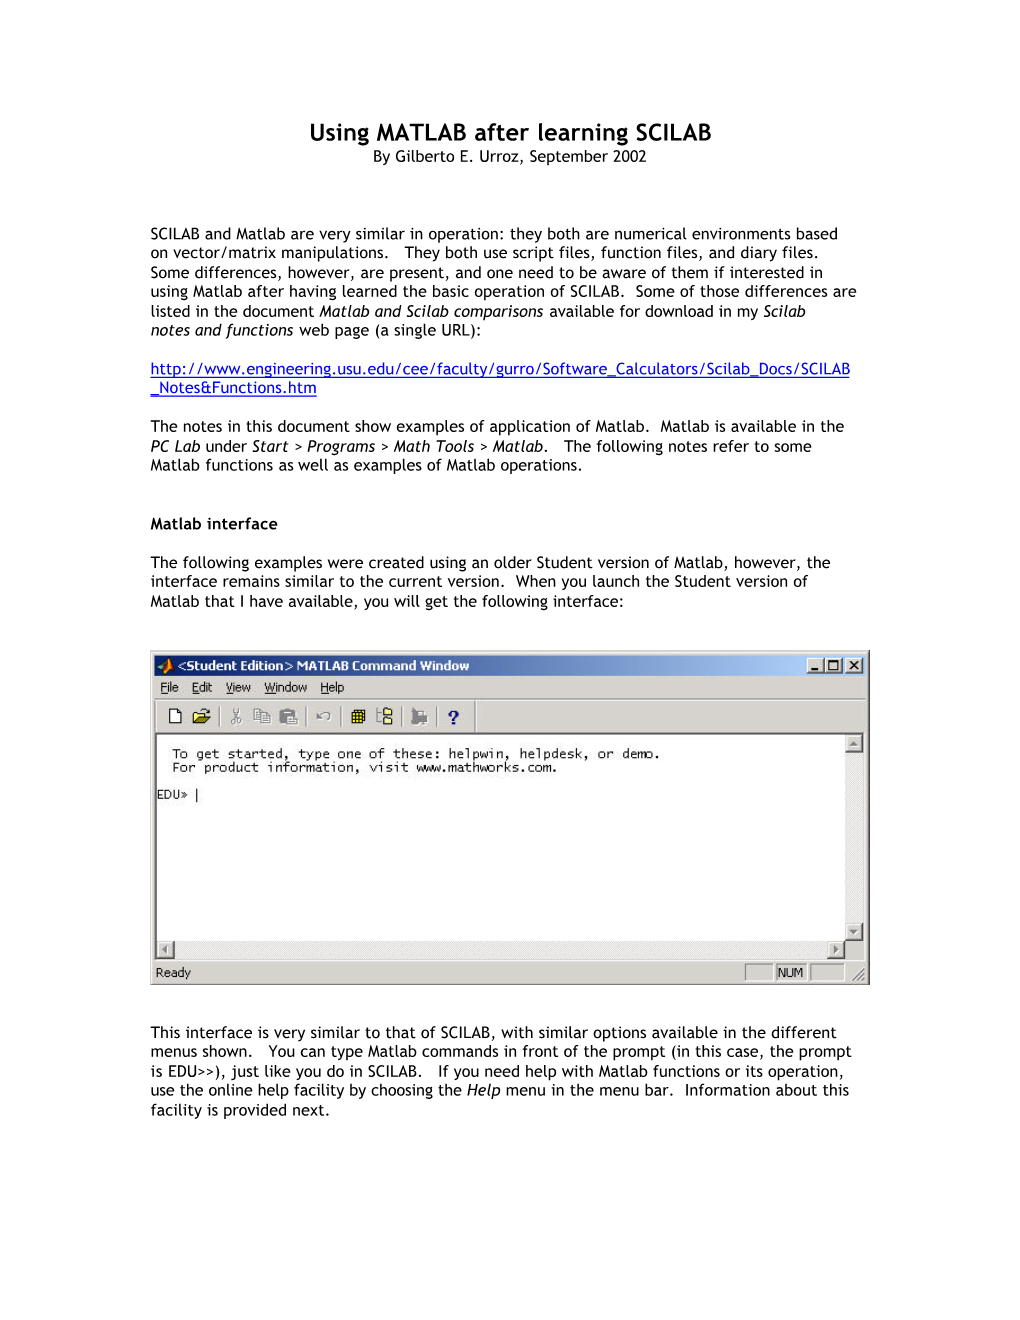 Using MATLAB After Learning SCILAB by Gilberto E